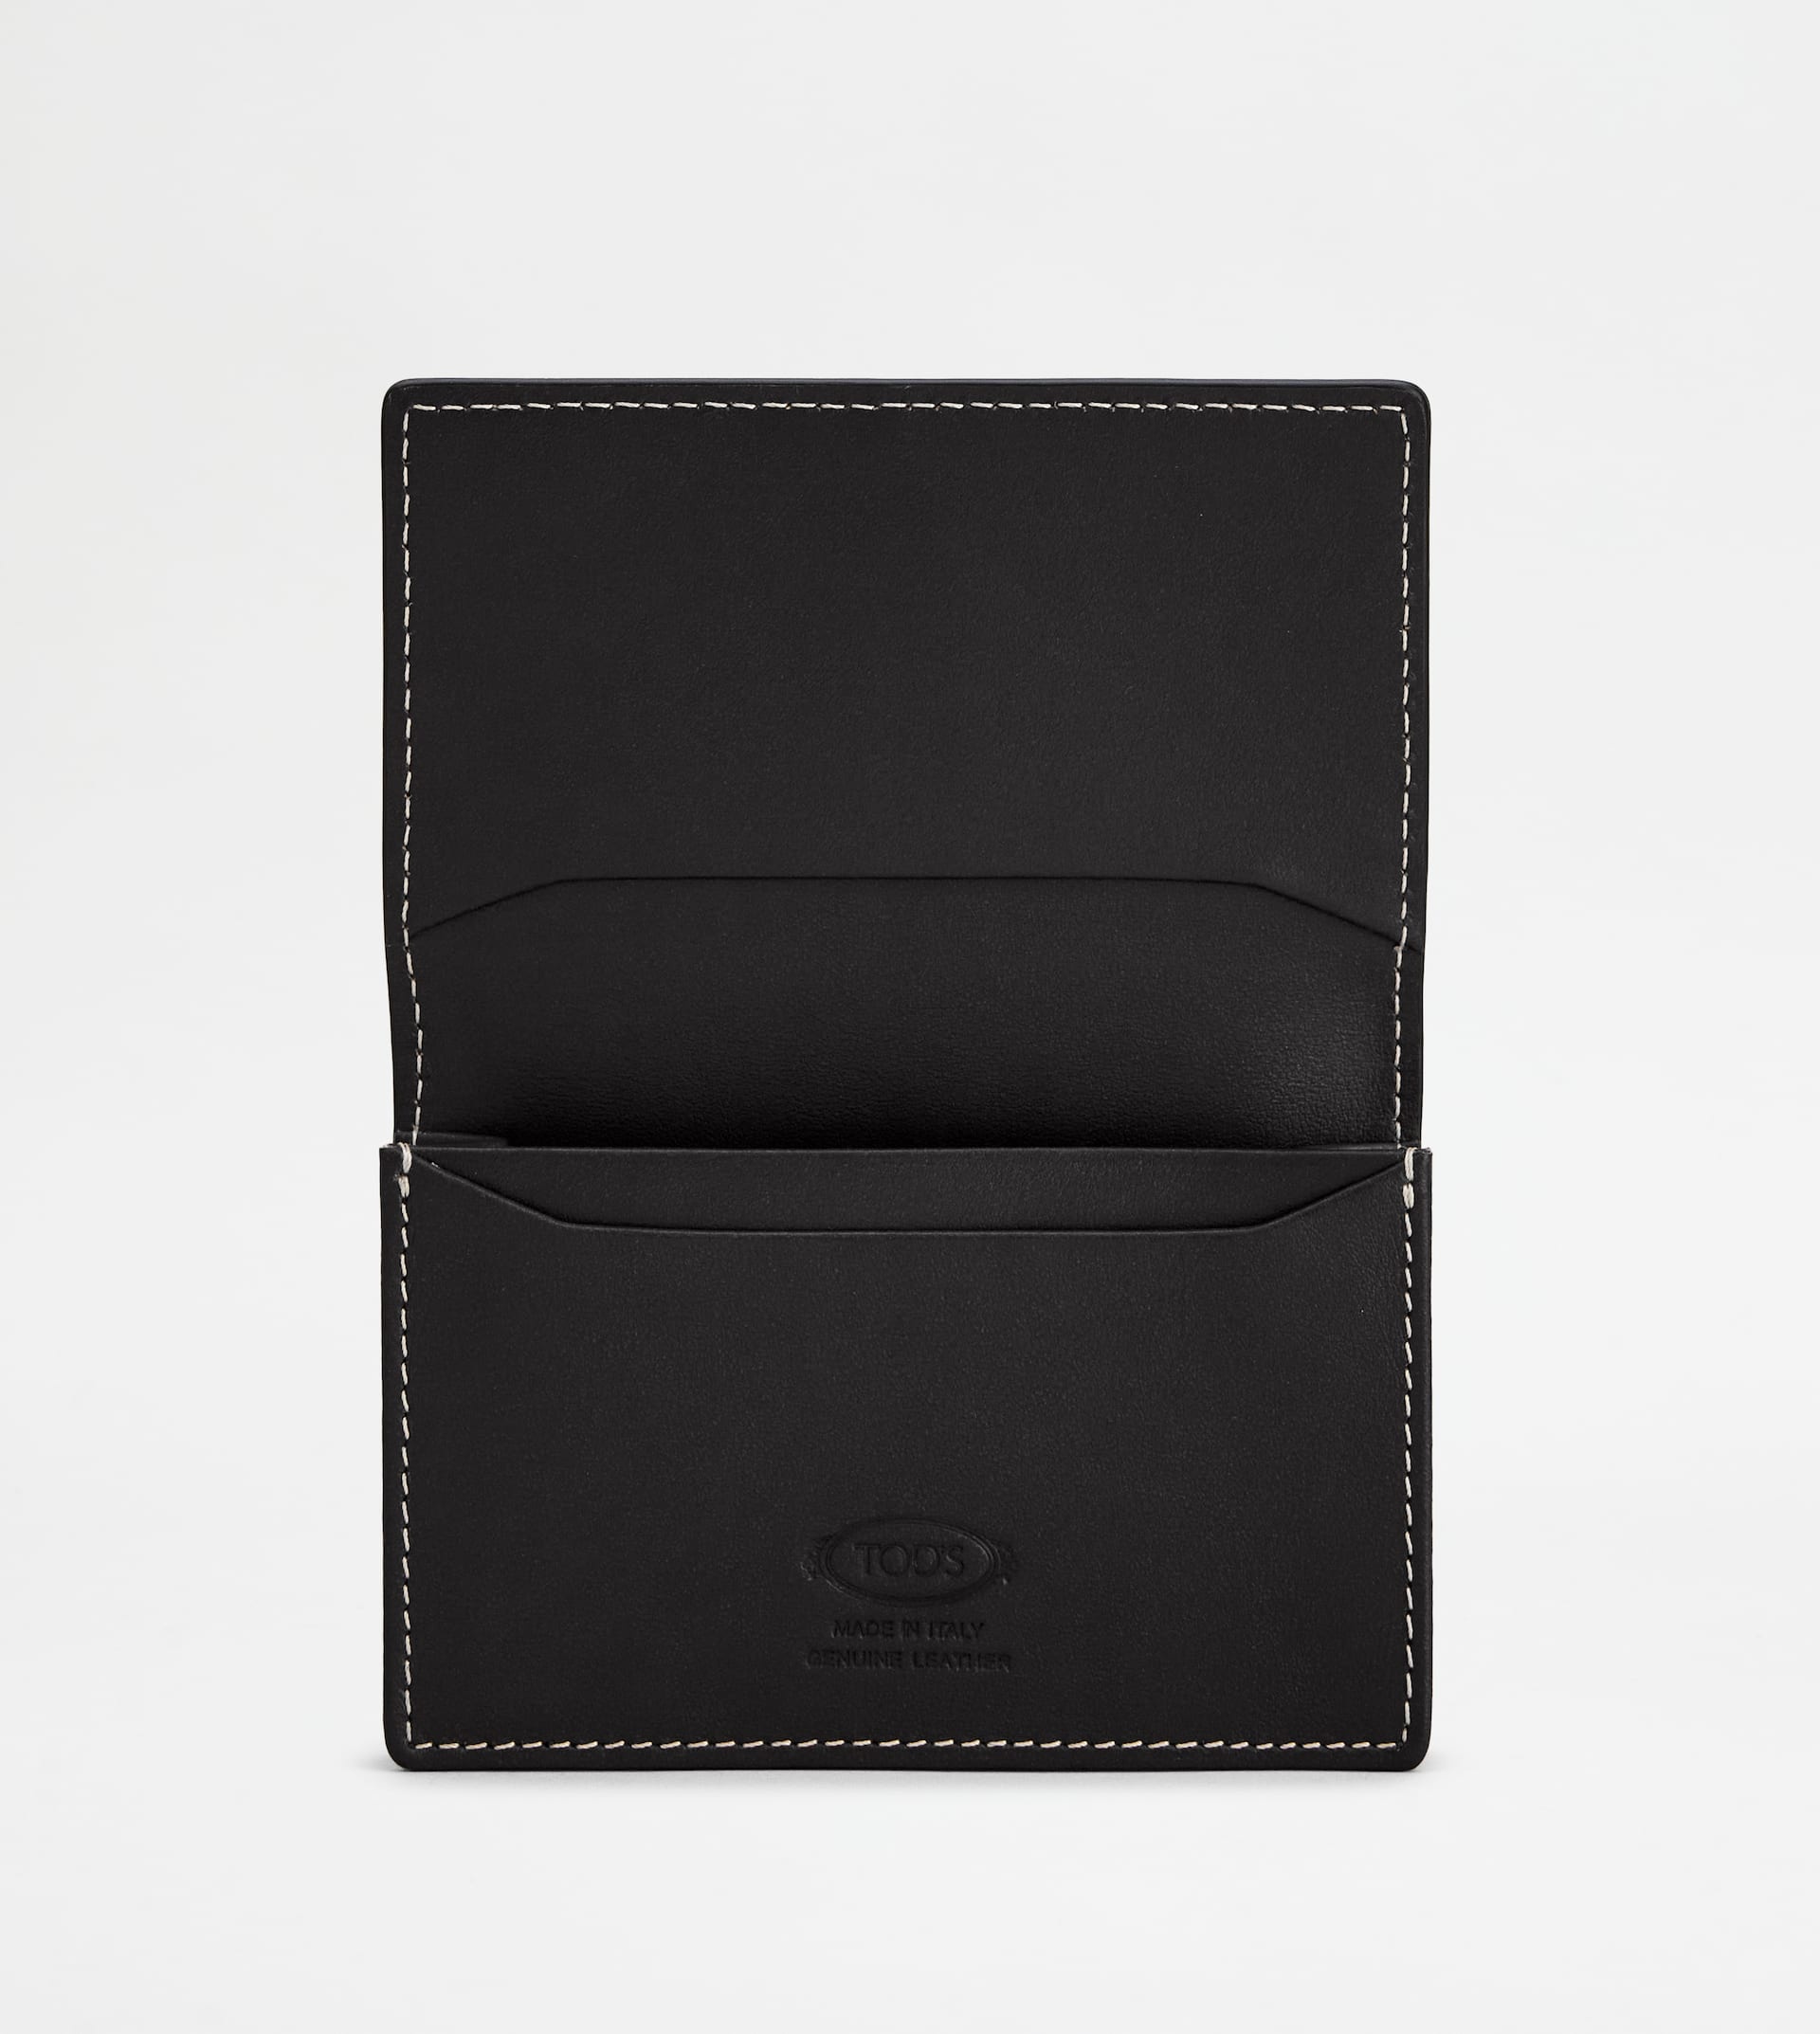 BUSINESS CARD HOLDER IN LEATHER - BLACK - 2